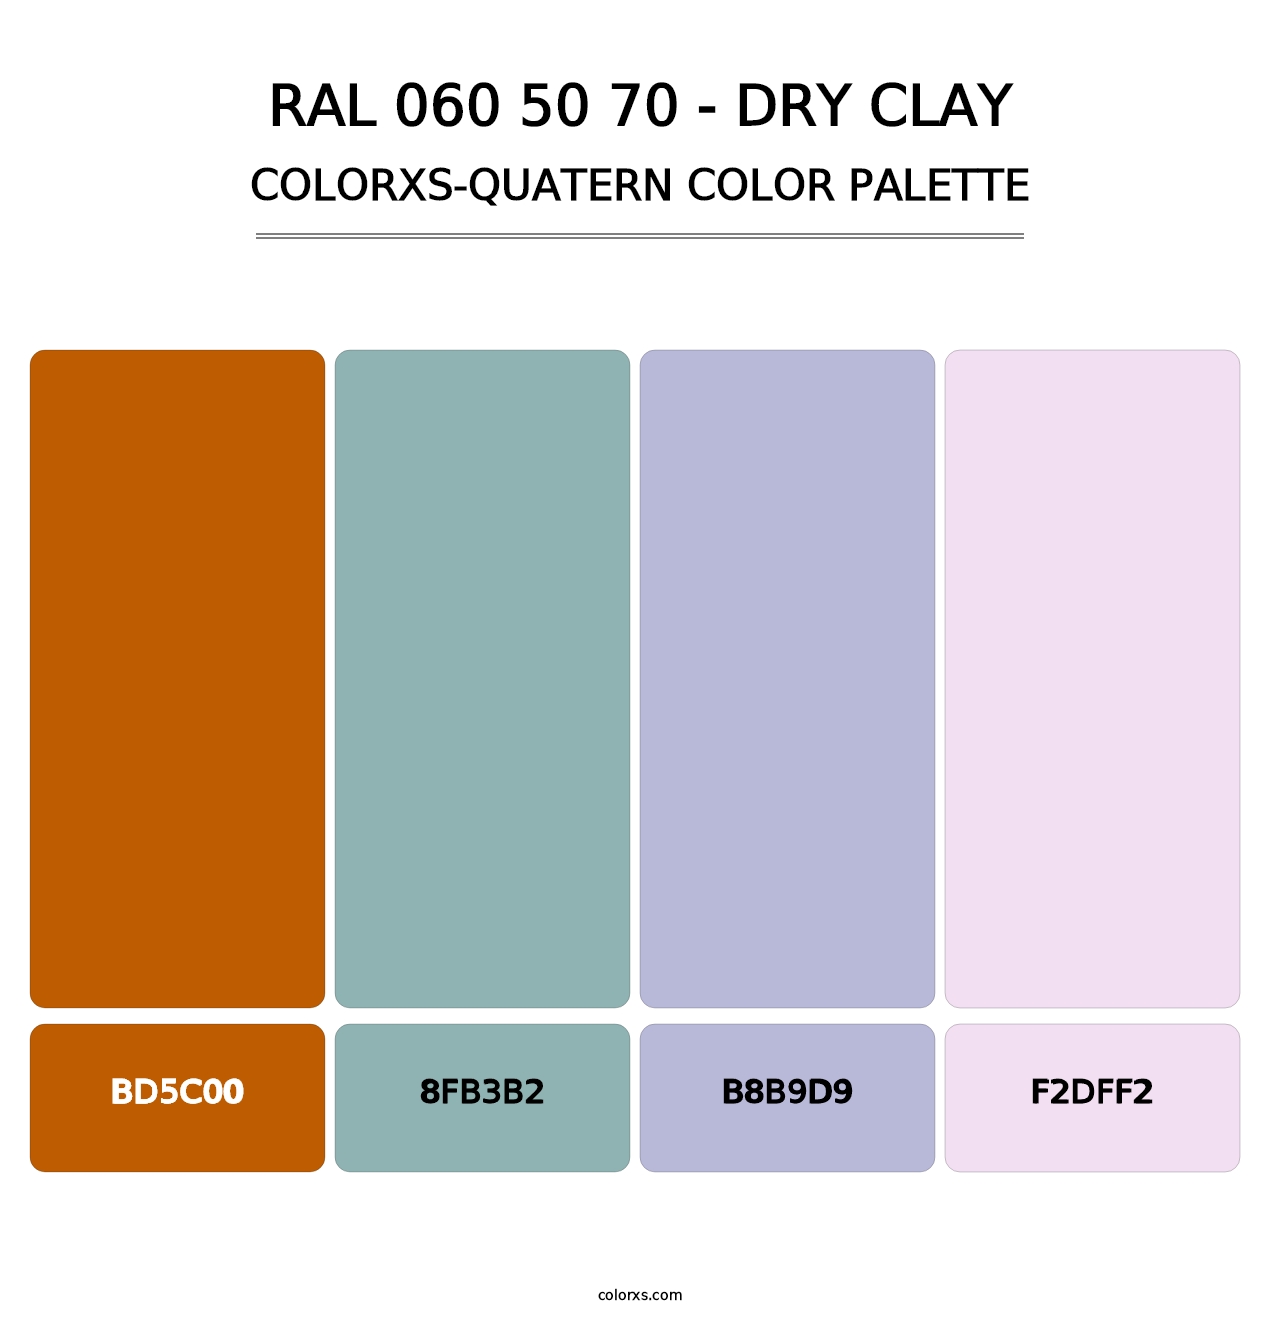 RAL 060 50 70 - Dry Clay - Colorxs Quatern Palette